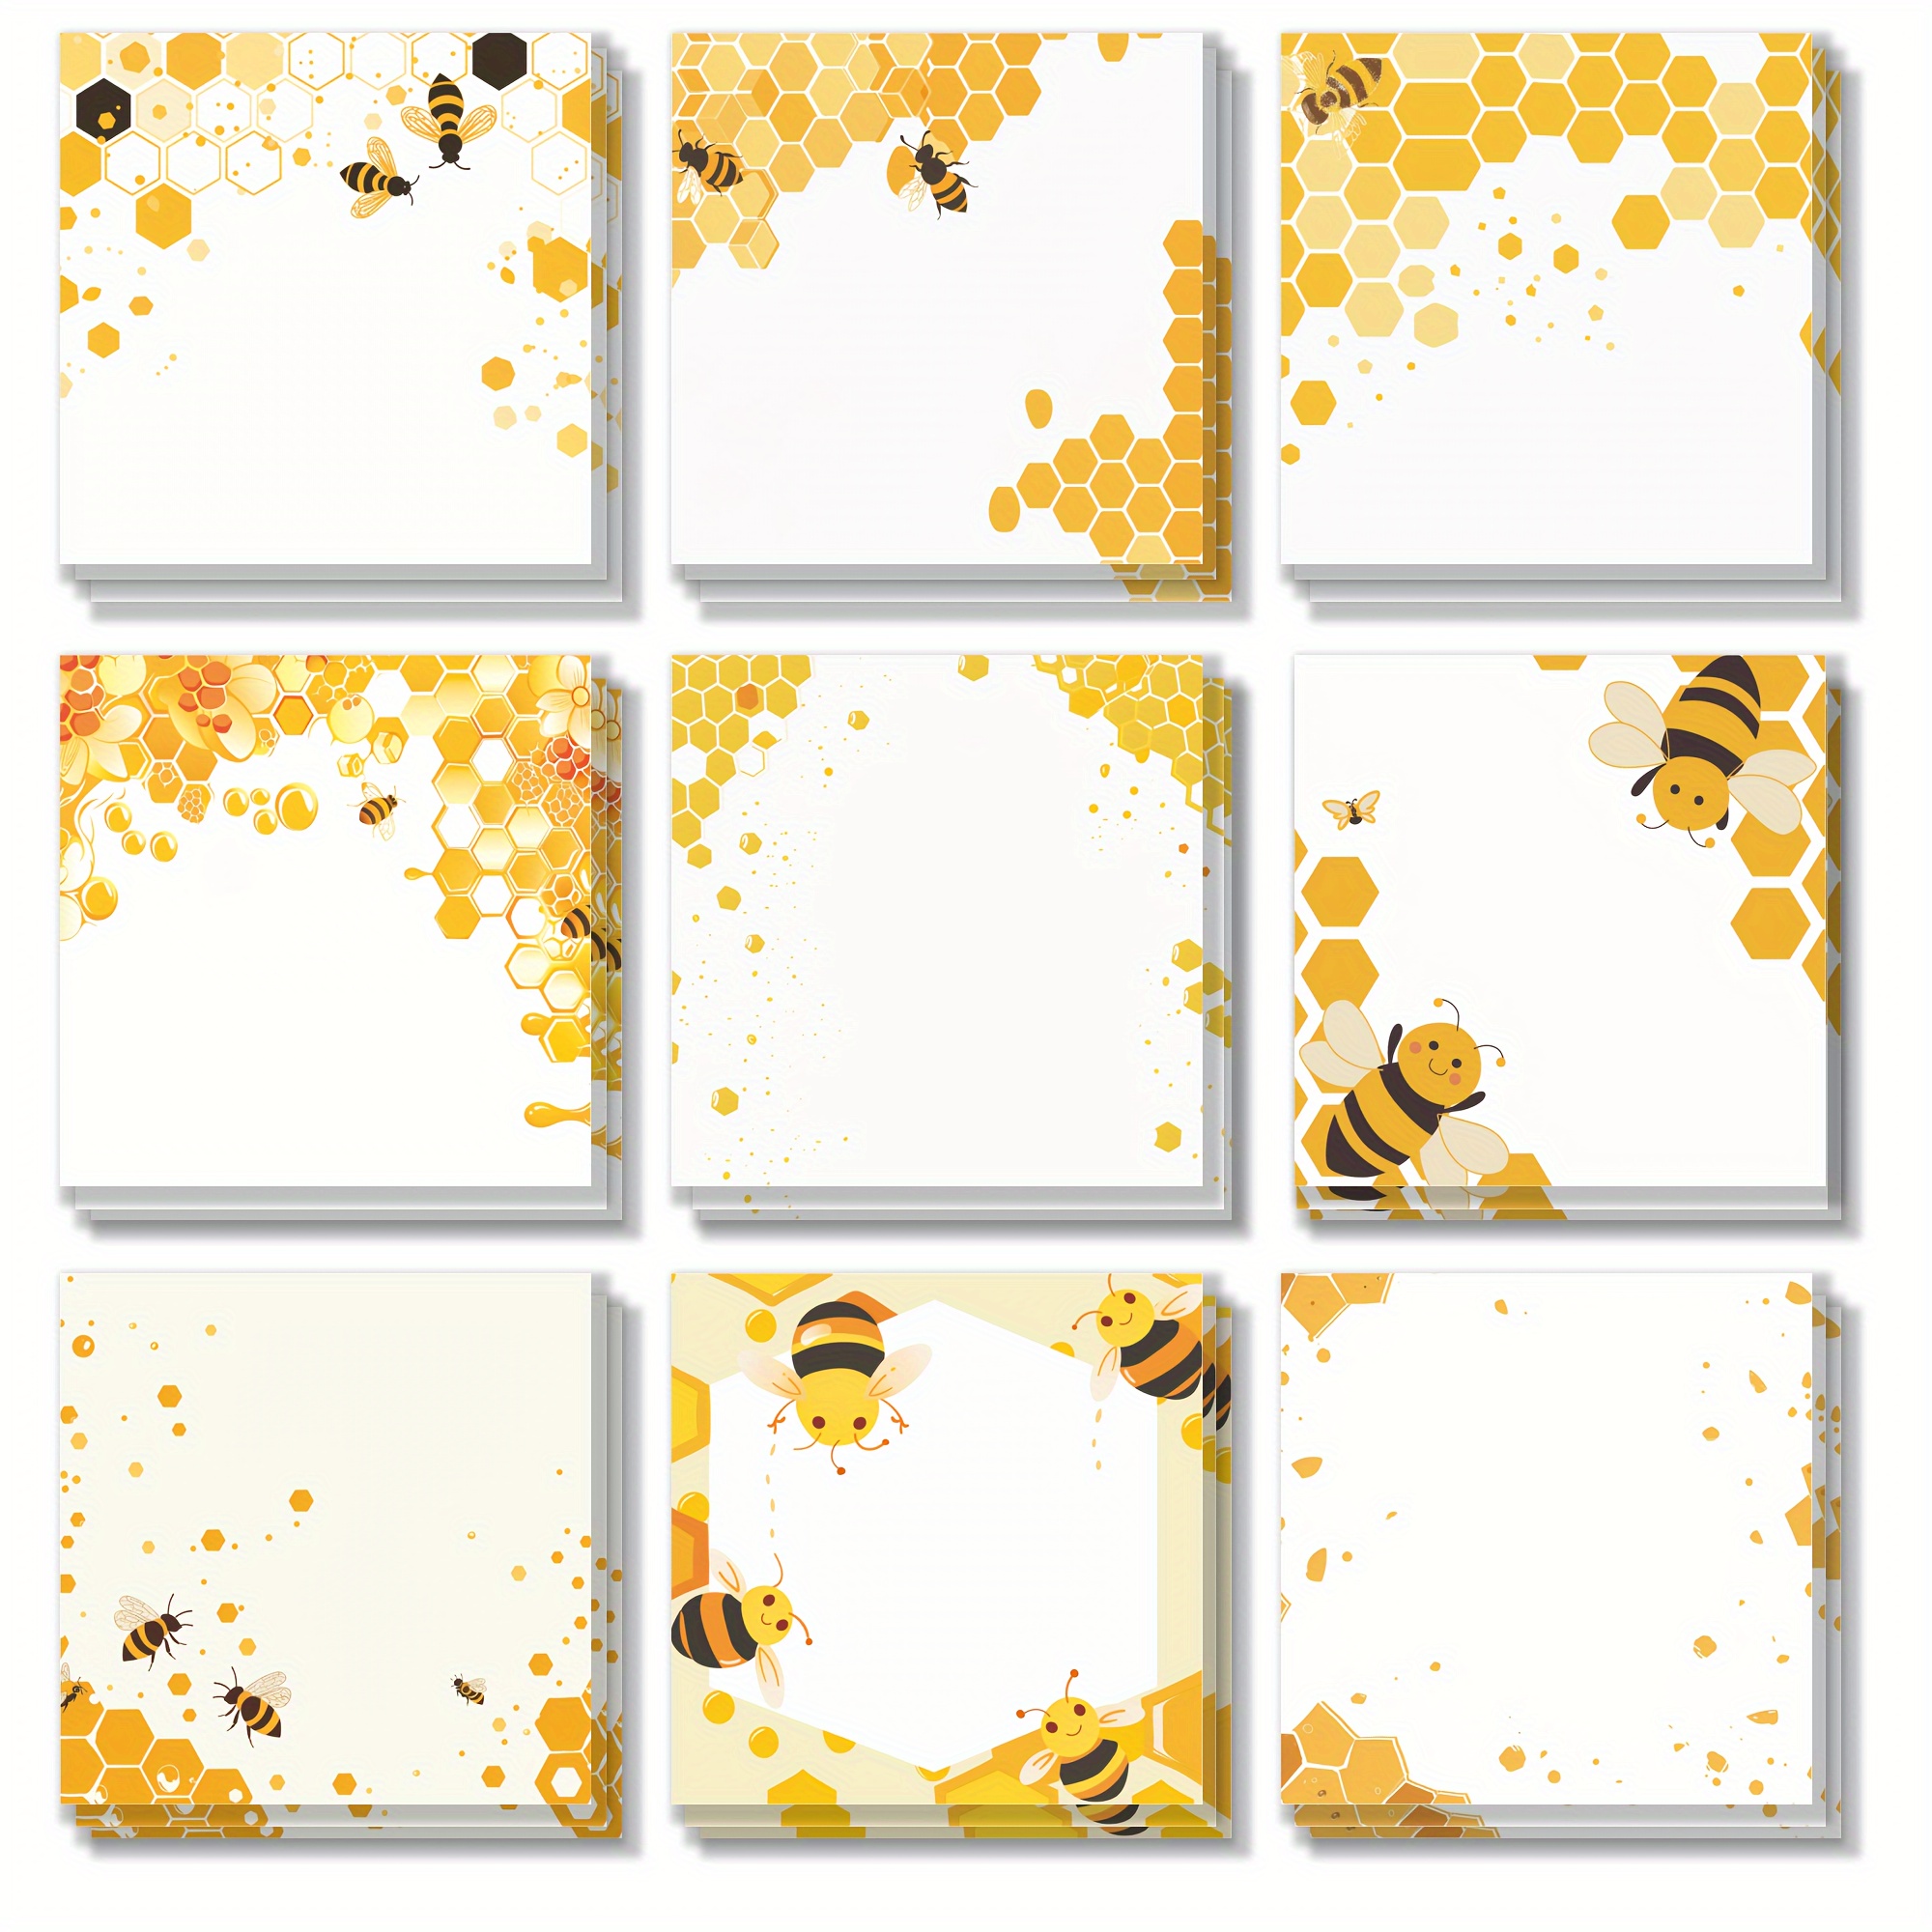 

Bee-themed Self-adhesive Sticky Notes, 3x3 Inch Square Shape, Honeycomb & Bee Design Memo Pads, Multi-pack For School, Office, Home Use, Teachers & Students Stationery Gift - Random Selection (1 Pack)